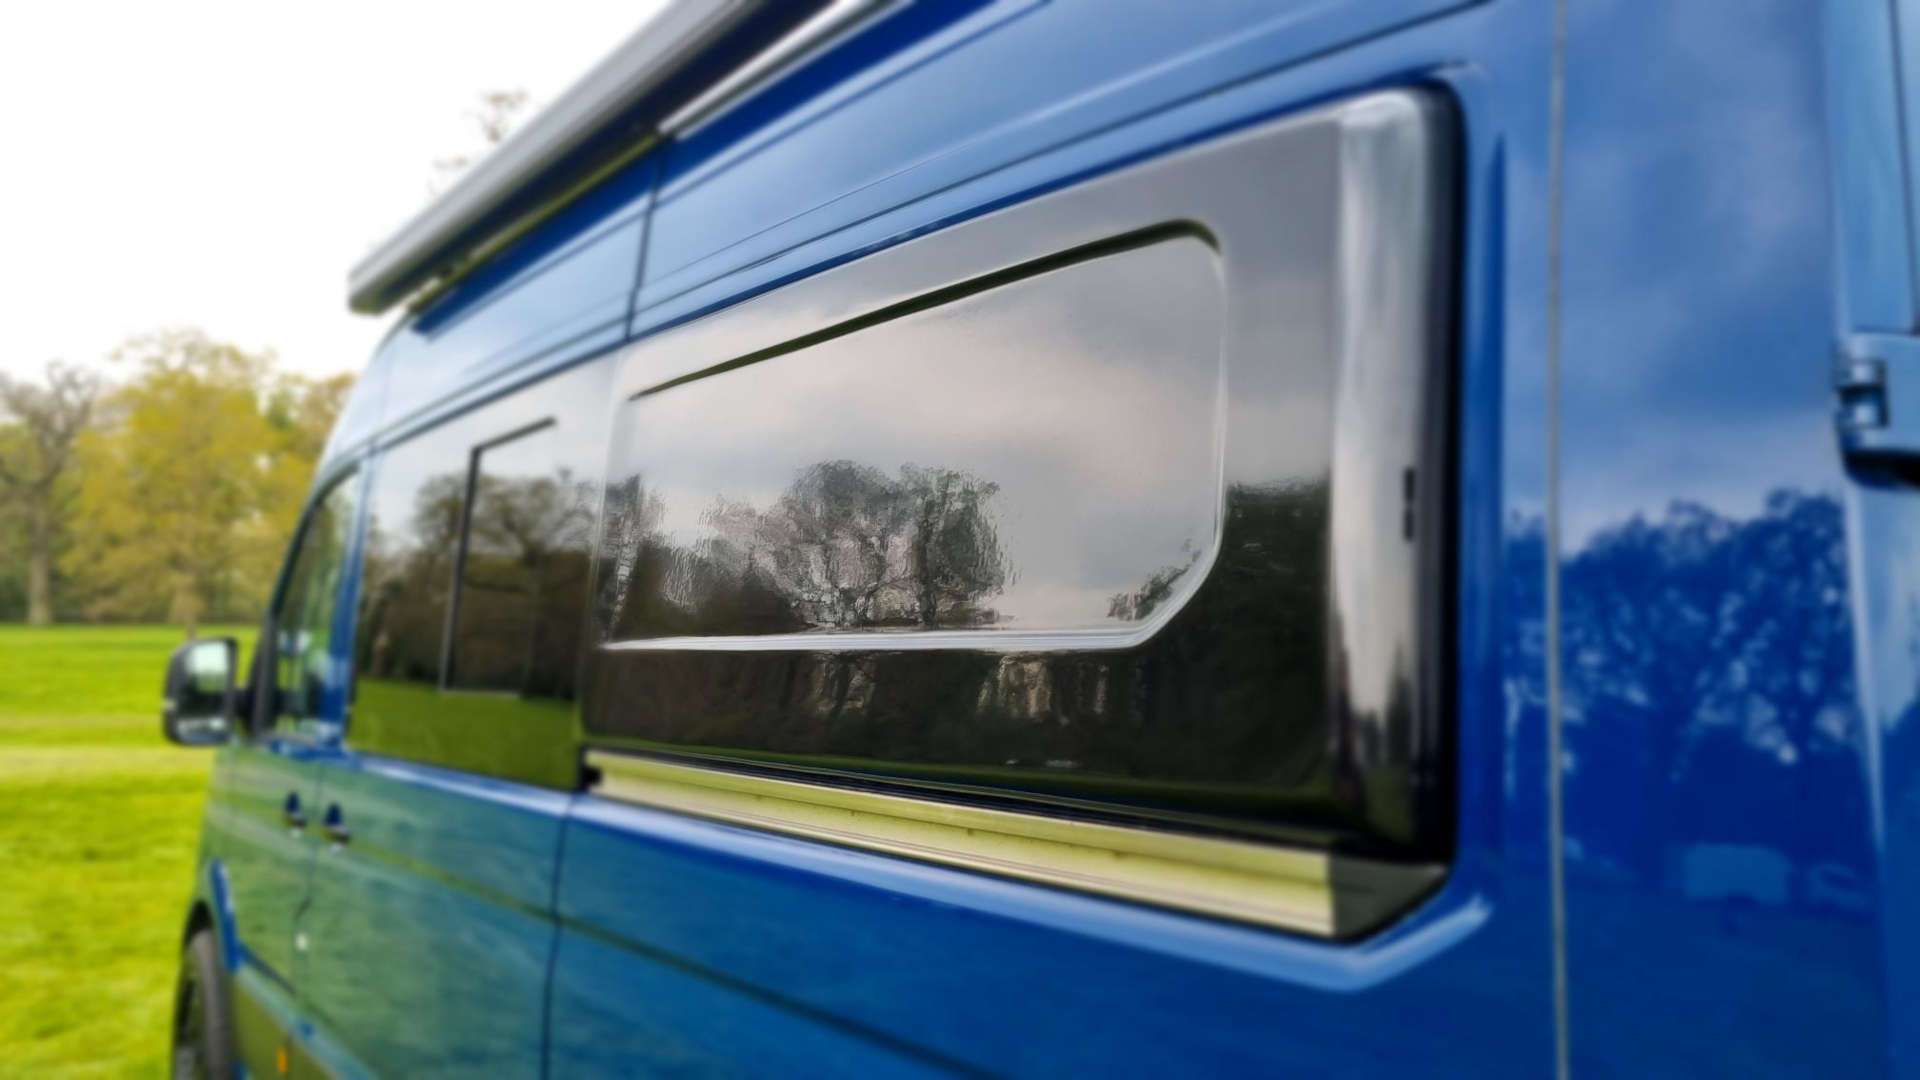 VW Crafter rear pods